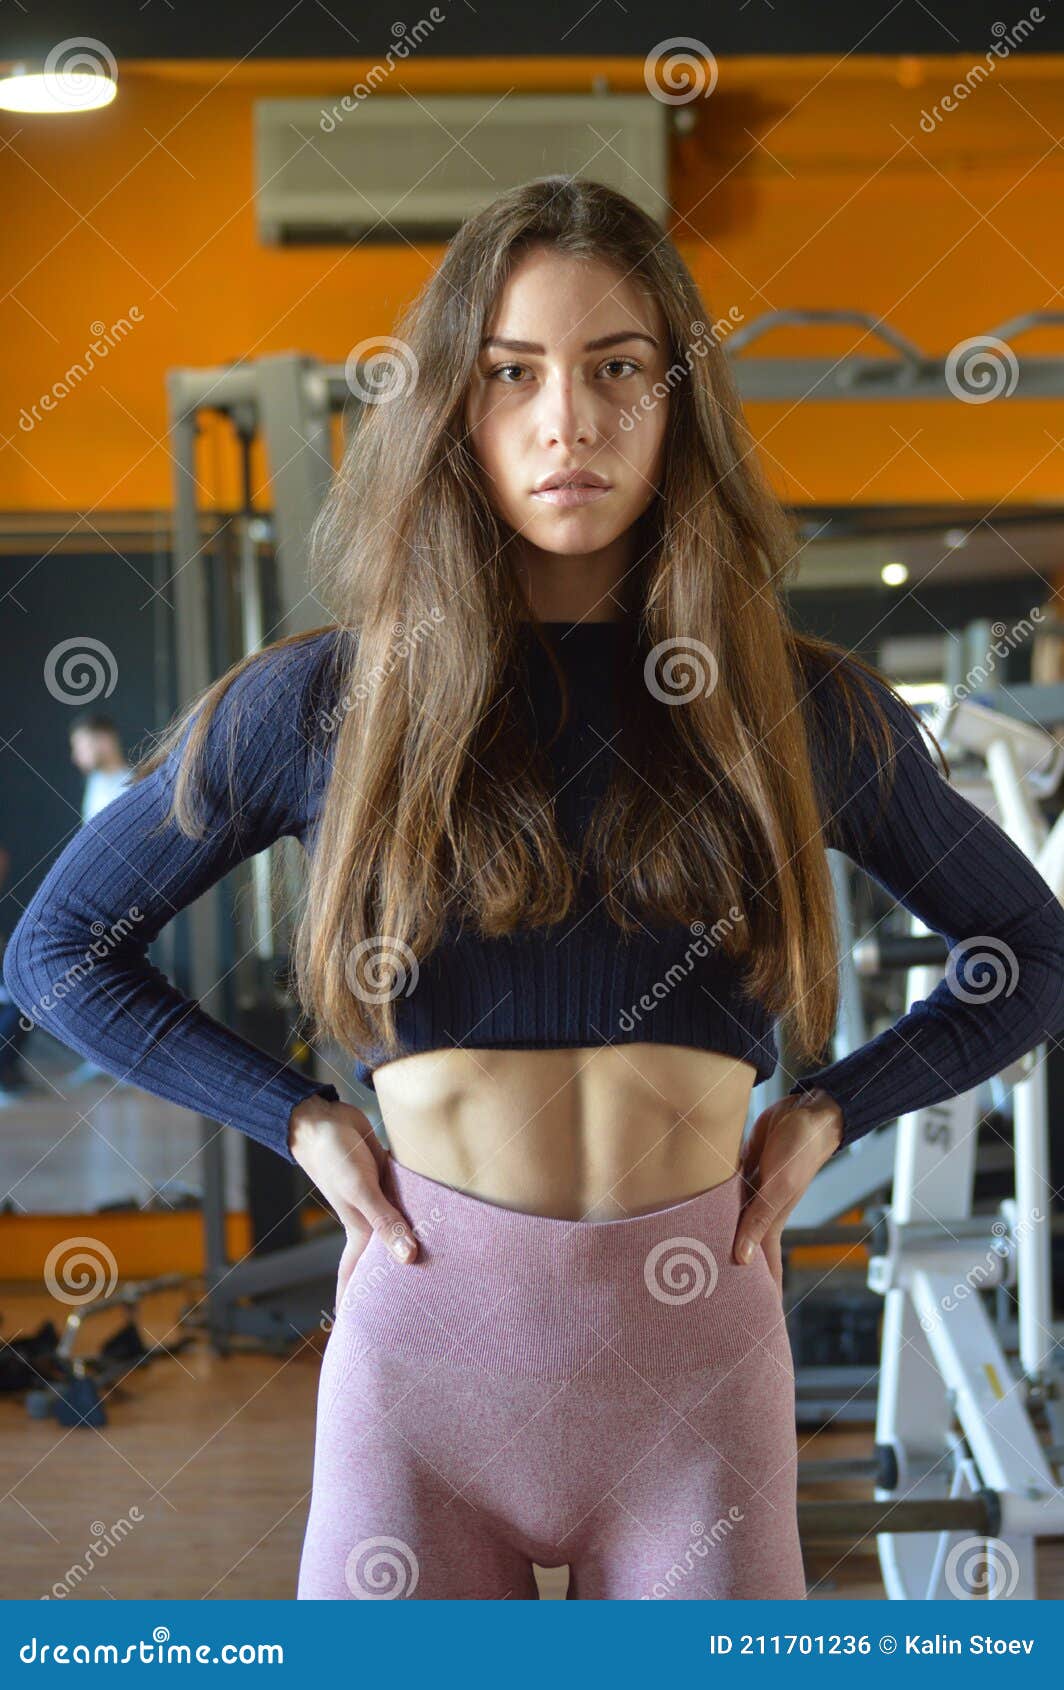 Teen fitness babe